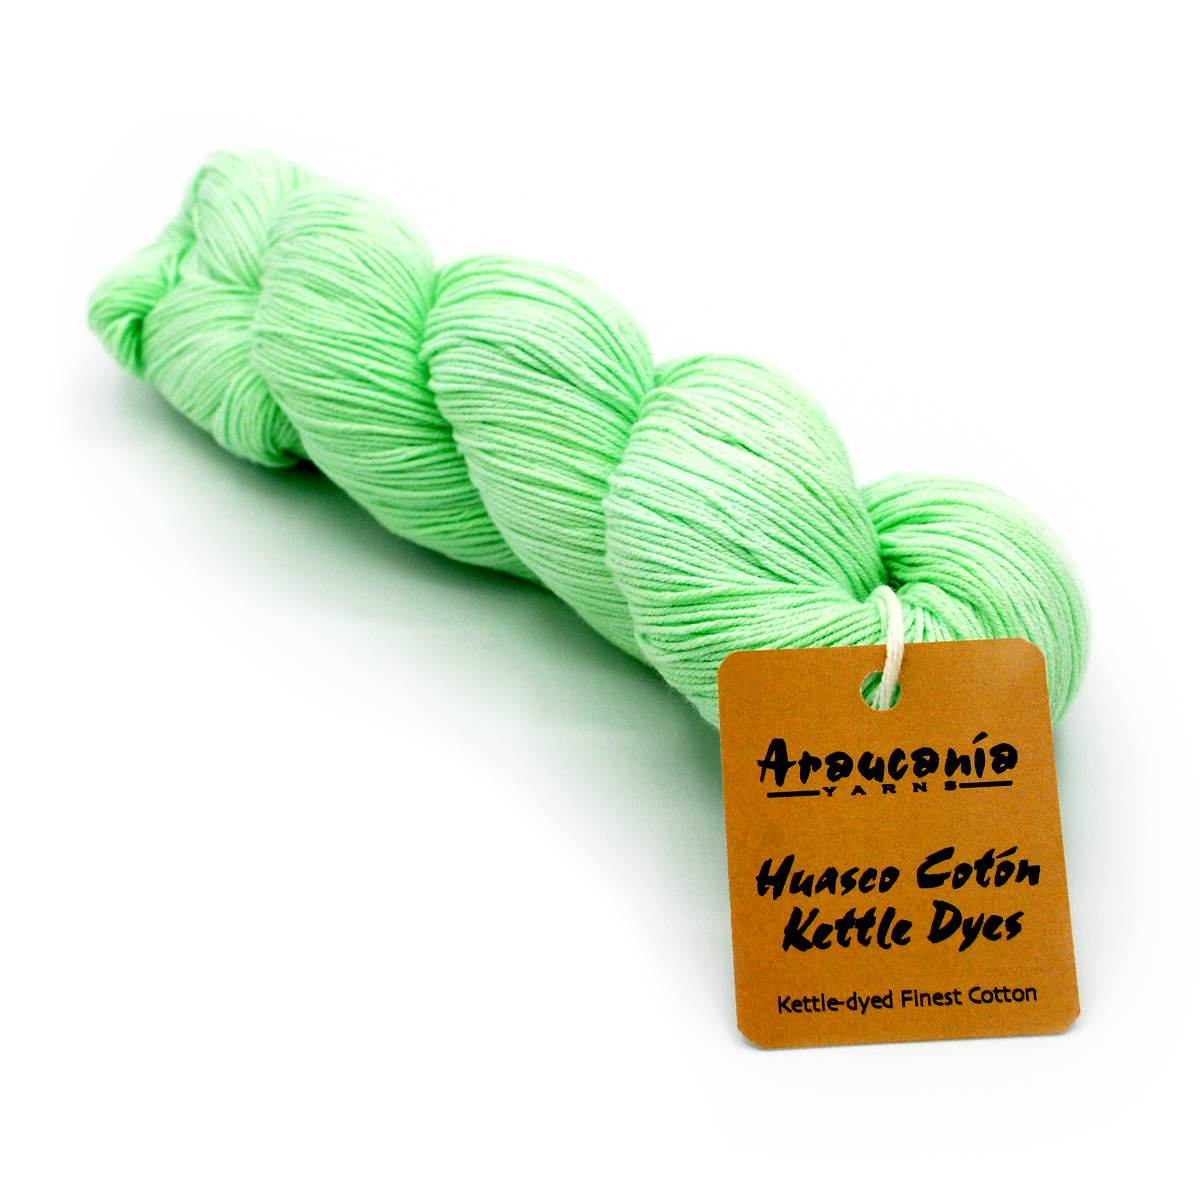 a skein of Huasco Cotón Kettle Dyes